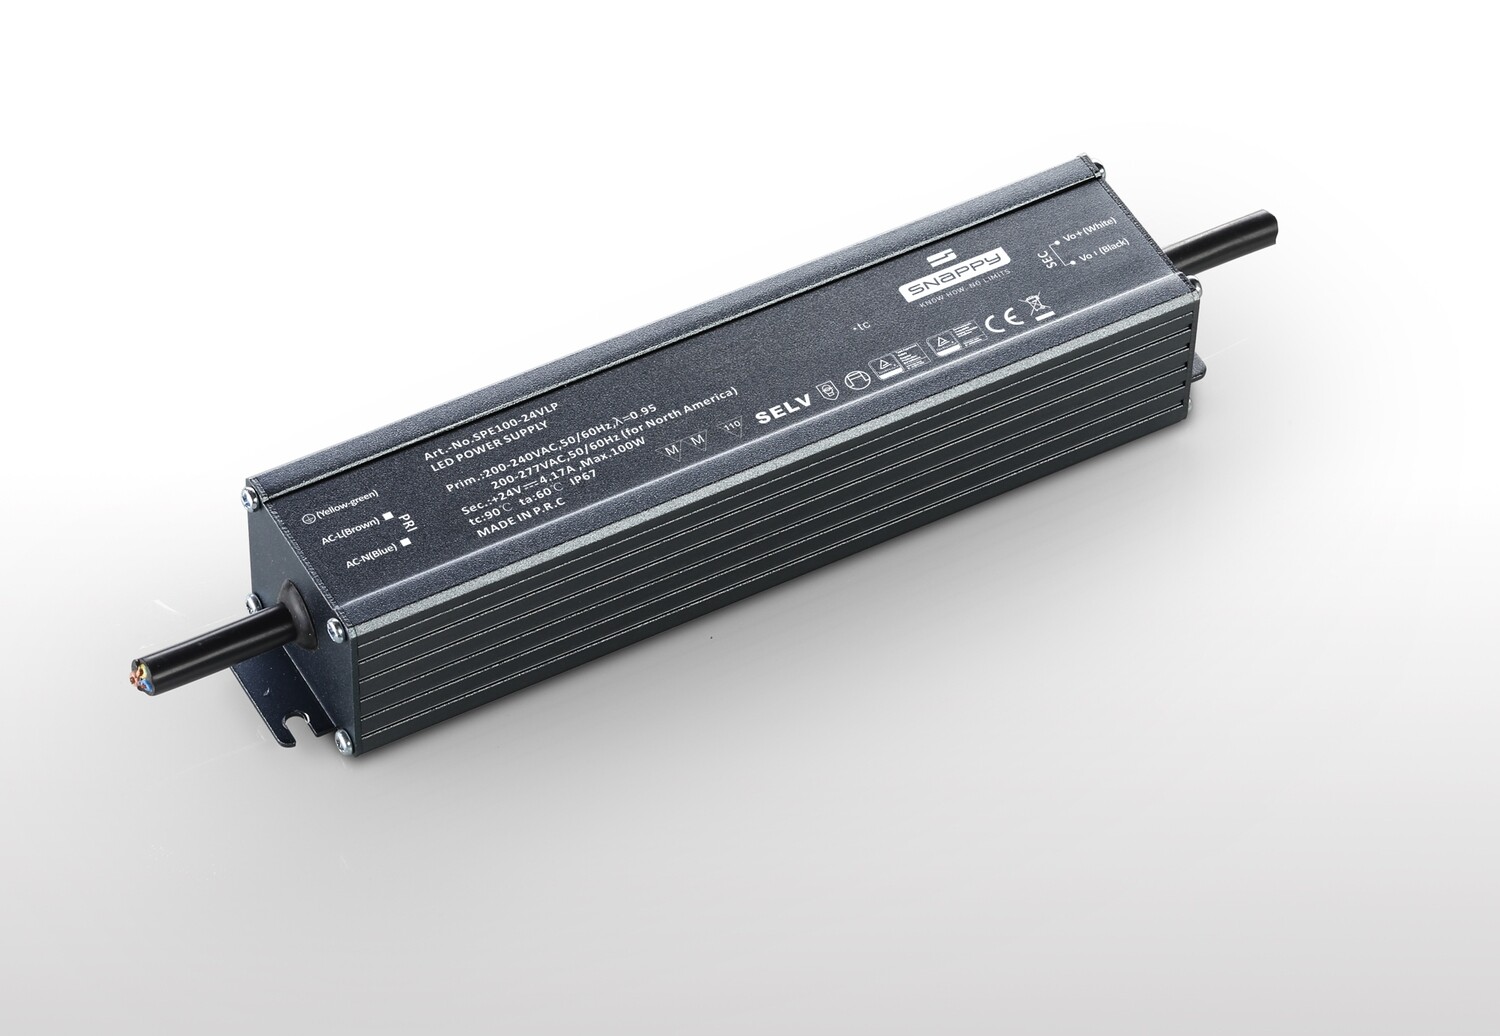 SPE 100W, Constant Voltage Non Dimmable Aluminum LED Driver, 24VDC,IP67